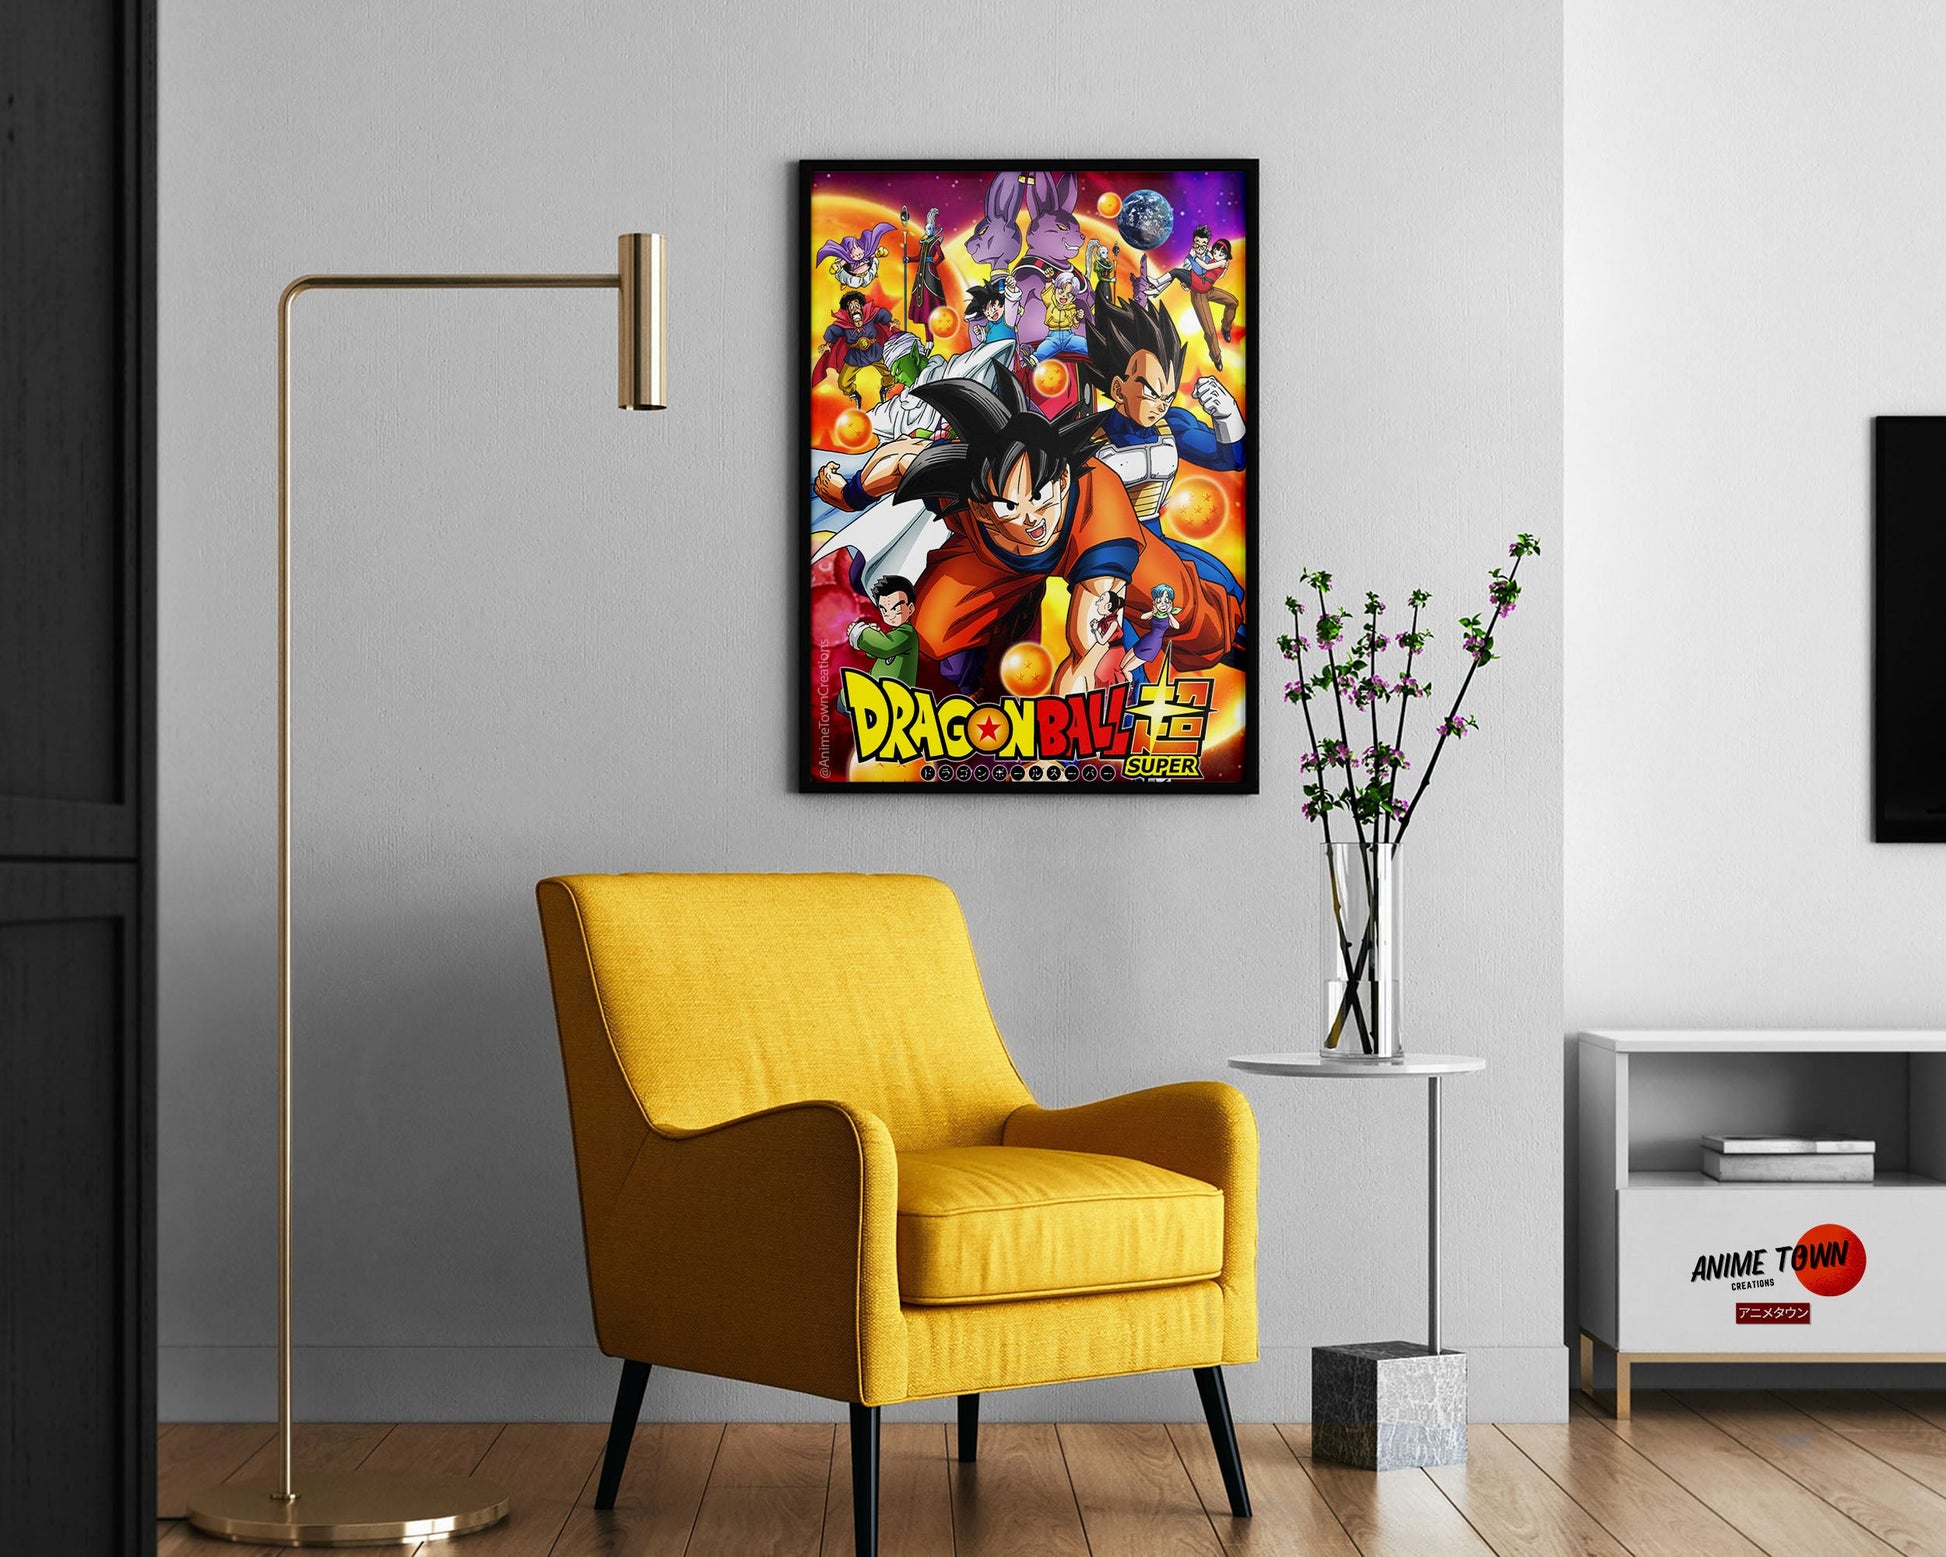 Anime Town Creations Poster Dragon Ball Super 11" x 17" Home Goods - Anime Dragon Ball Poster